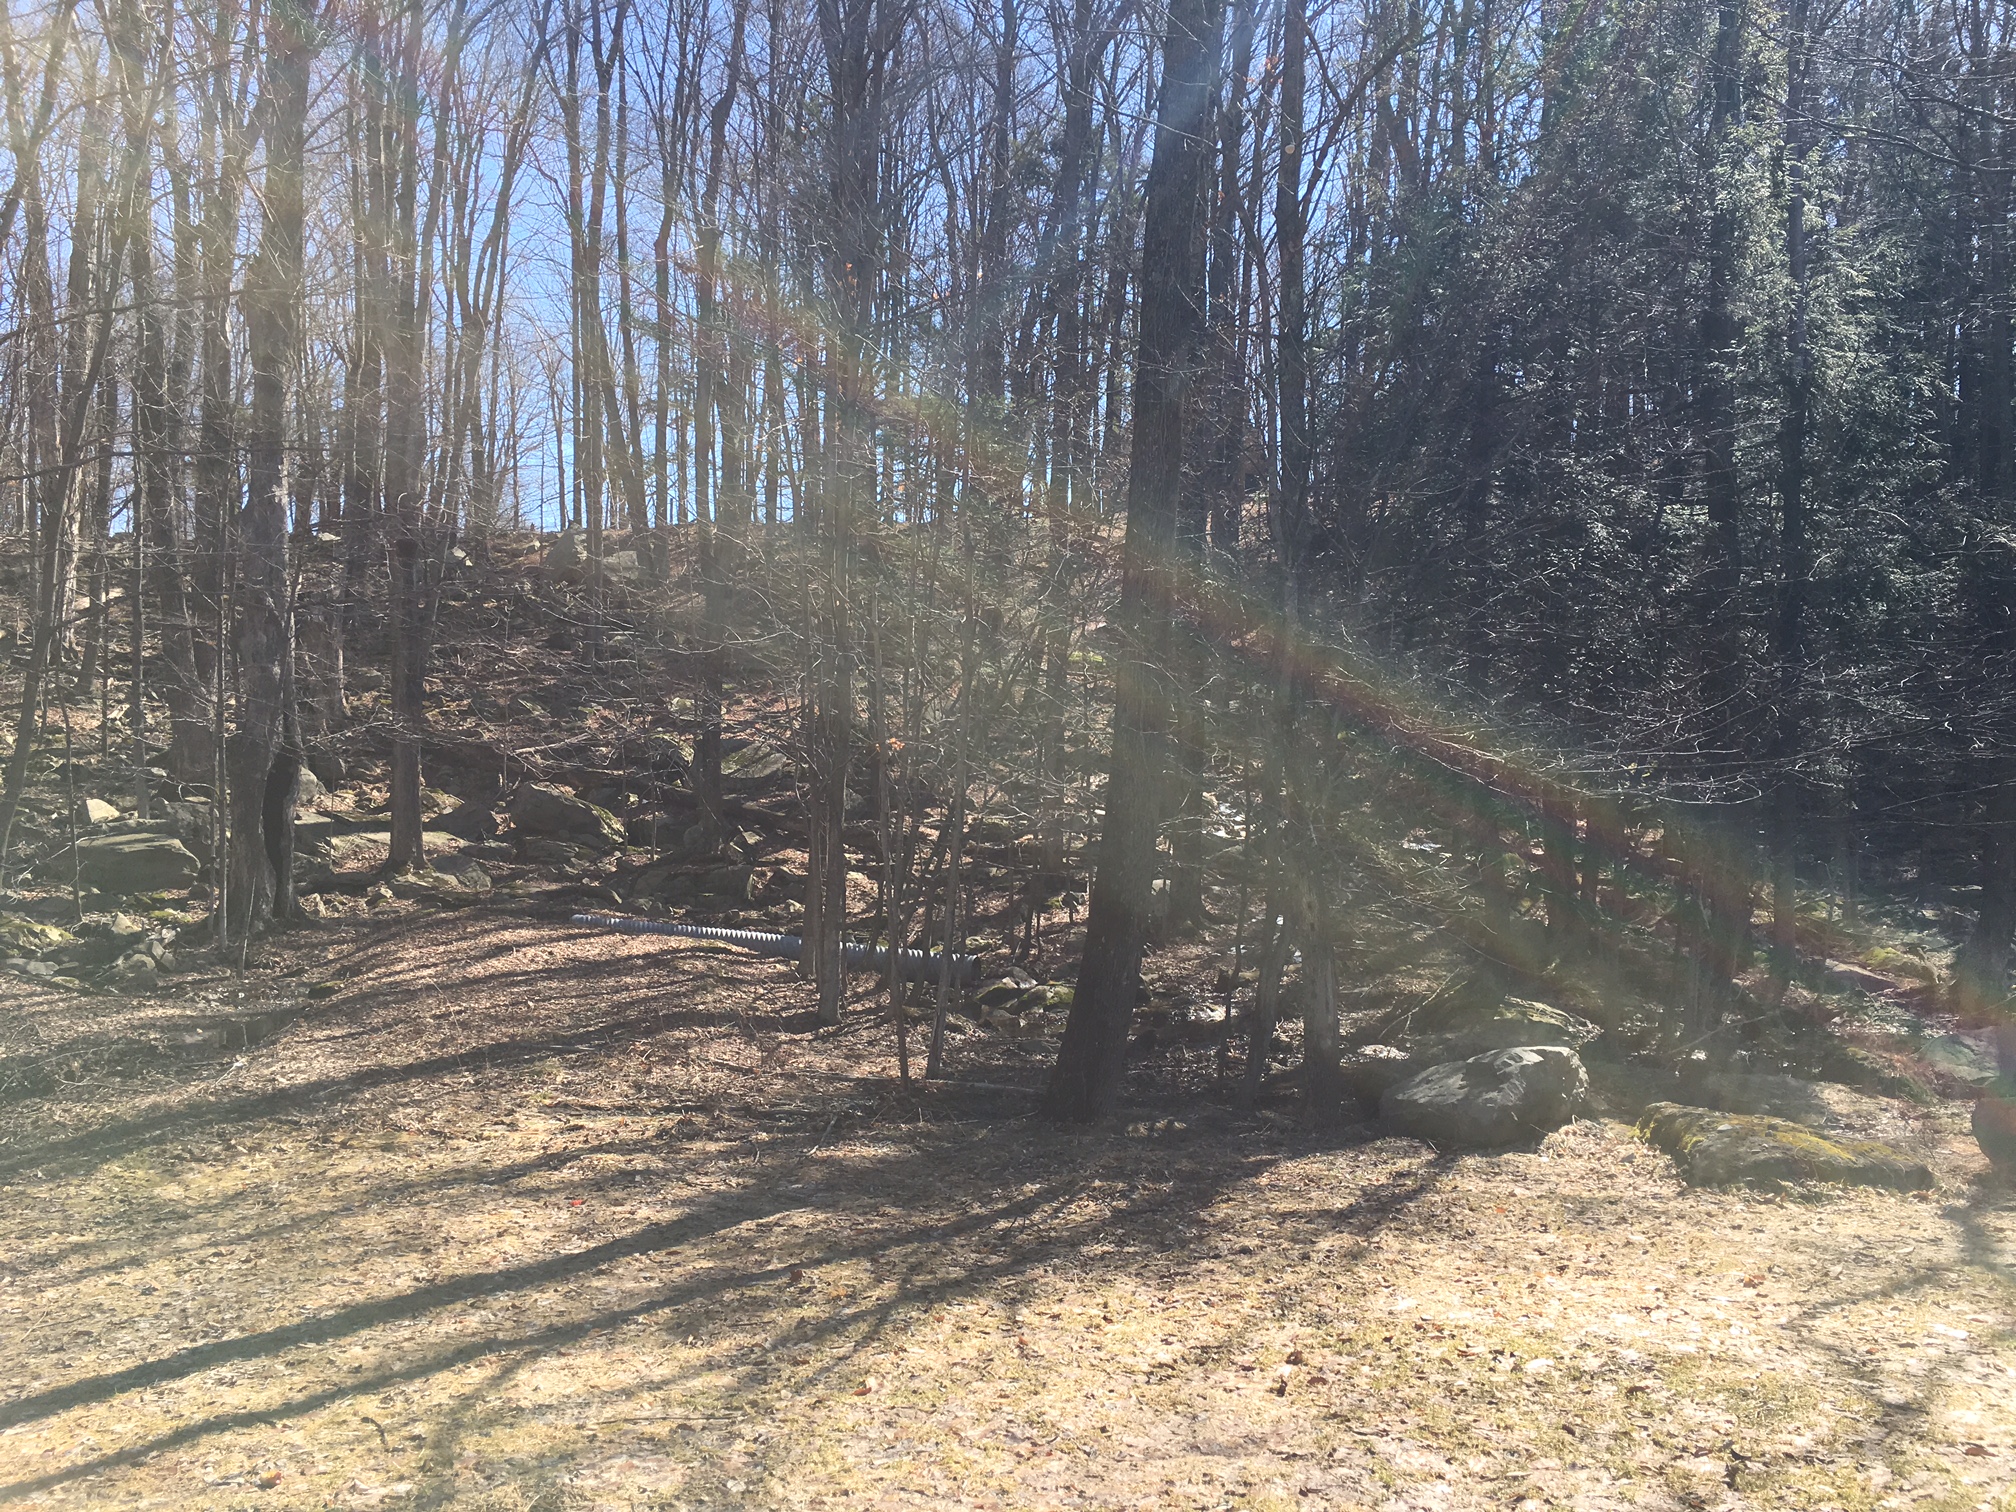 3005 North Gate Road - 1 Acre Building Lot in The Hideout, Lake Ariel PA